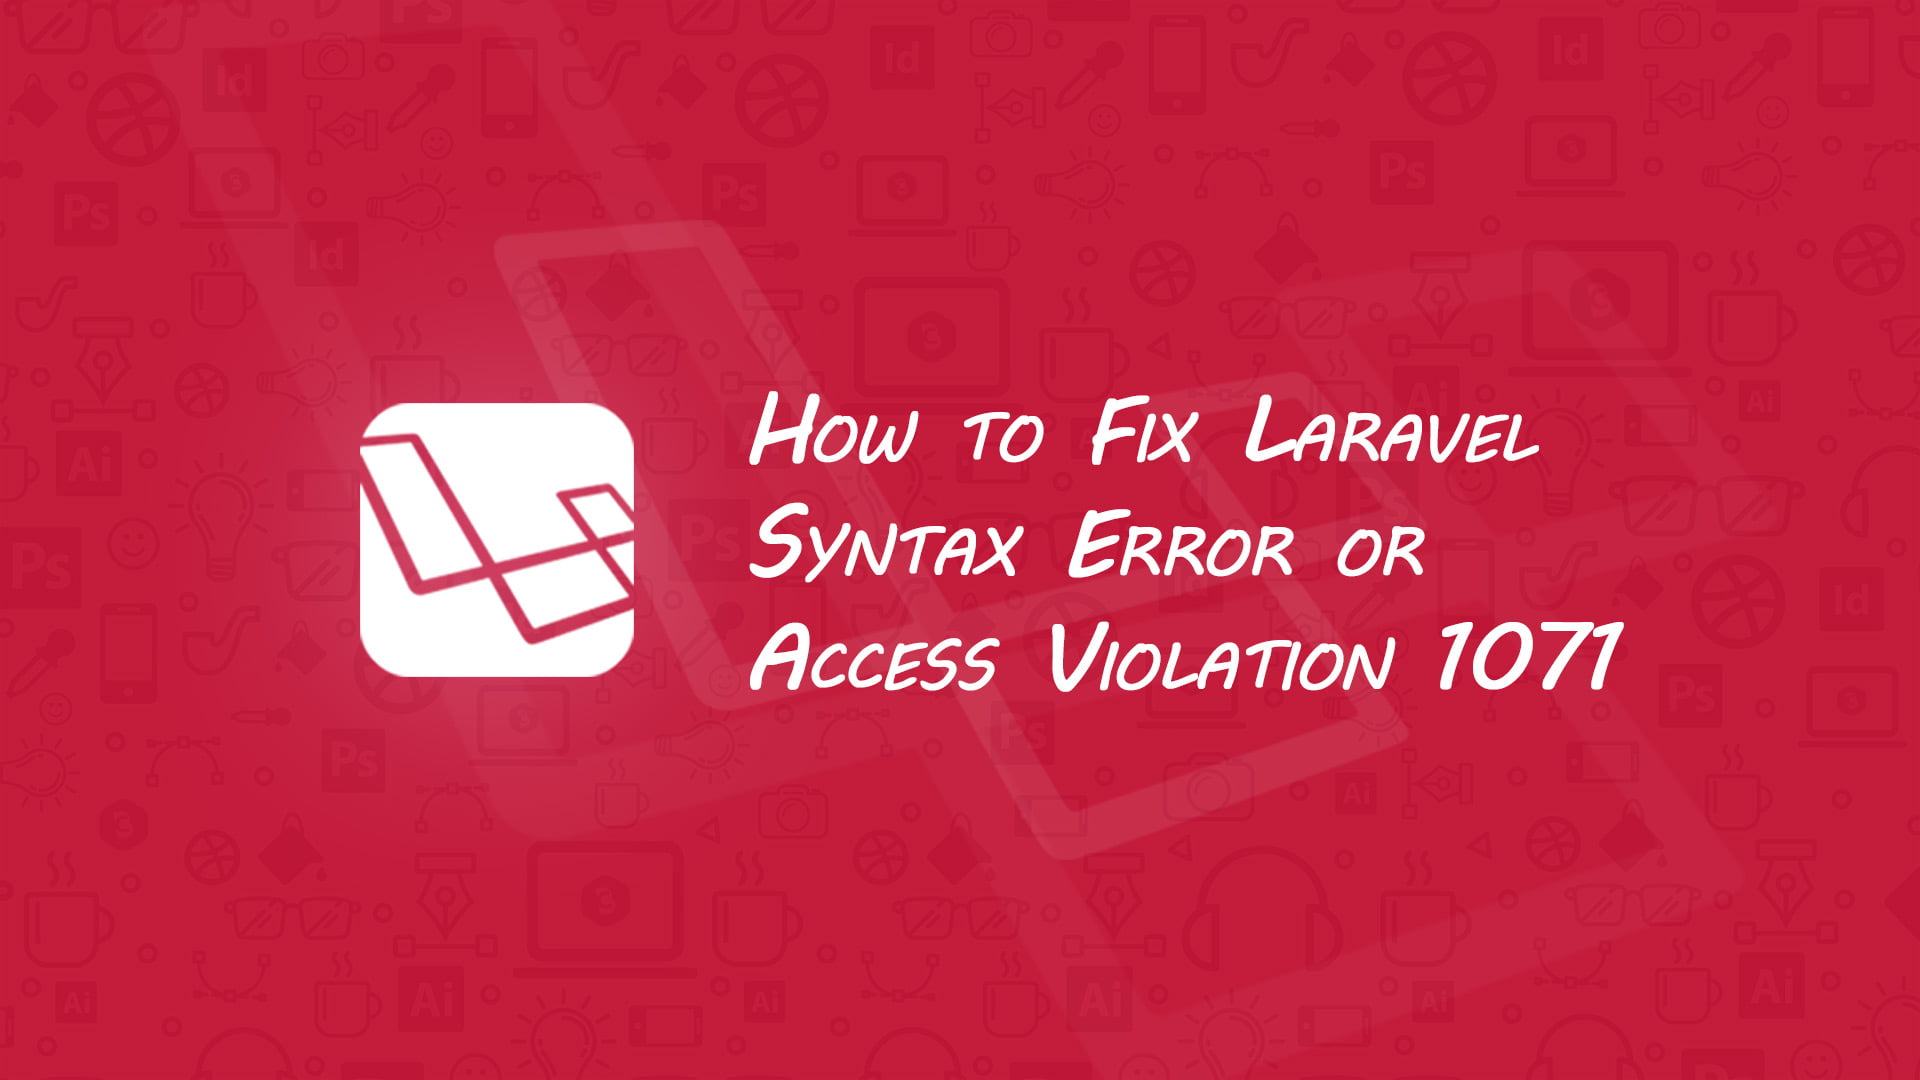 How to Fix Laravel Syntax Error or Access Violation 1071  